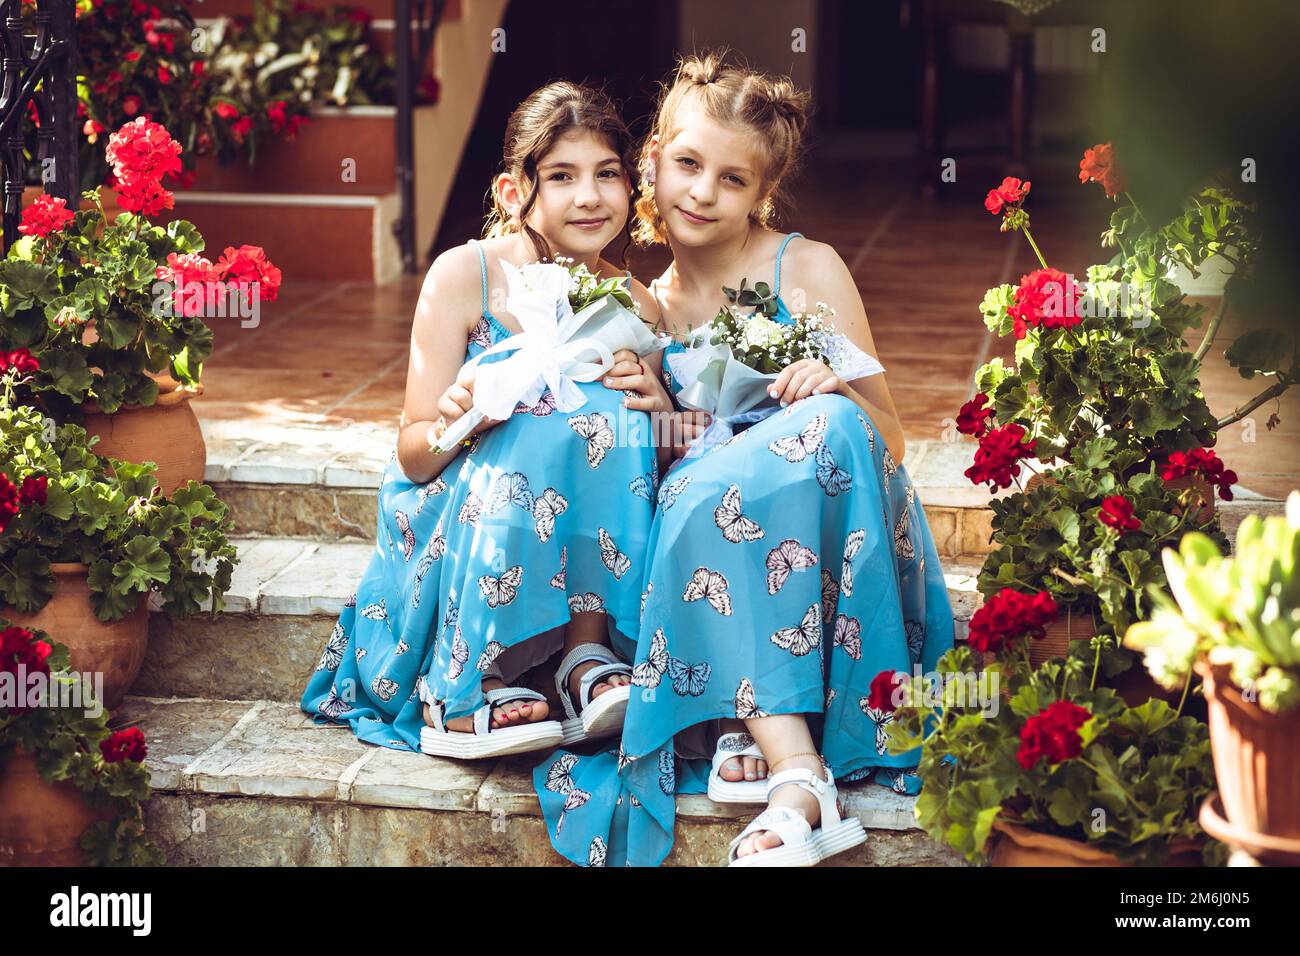 Two girls, sisters sitting outdoors in butterfly patterned dress, surrounded with flowers Stock Photo